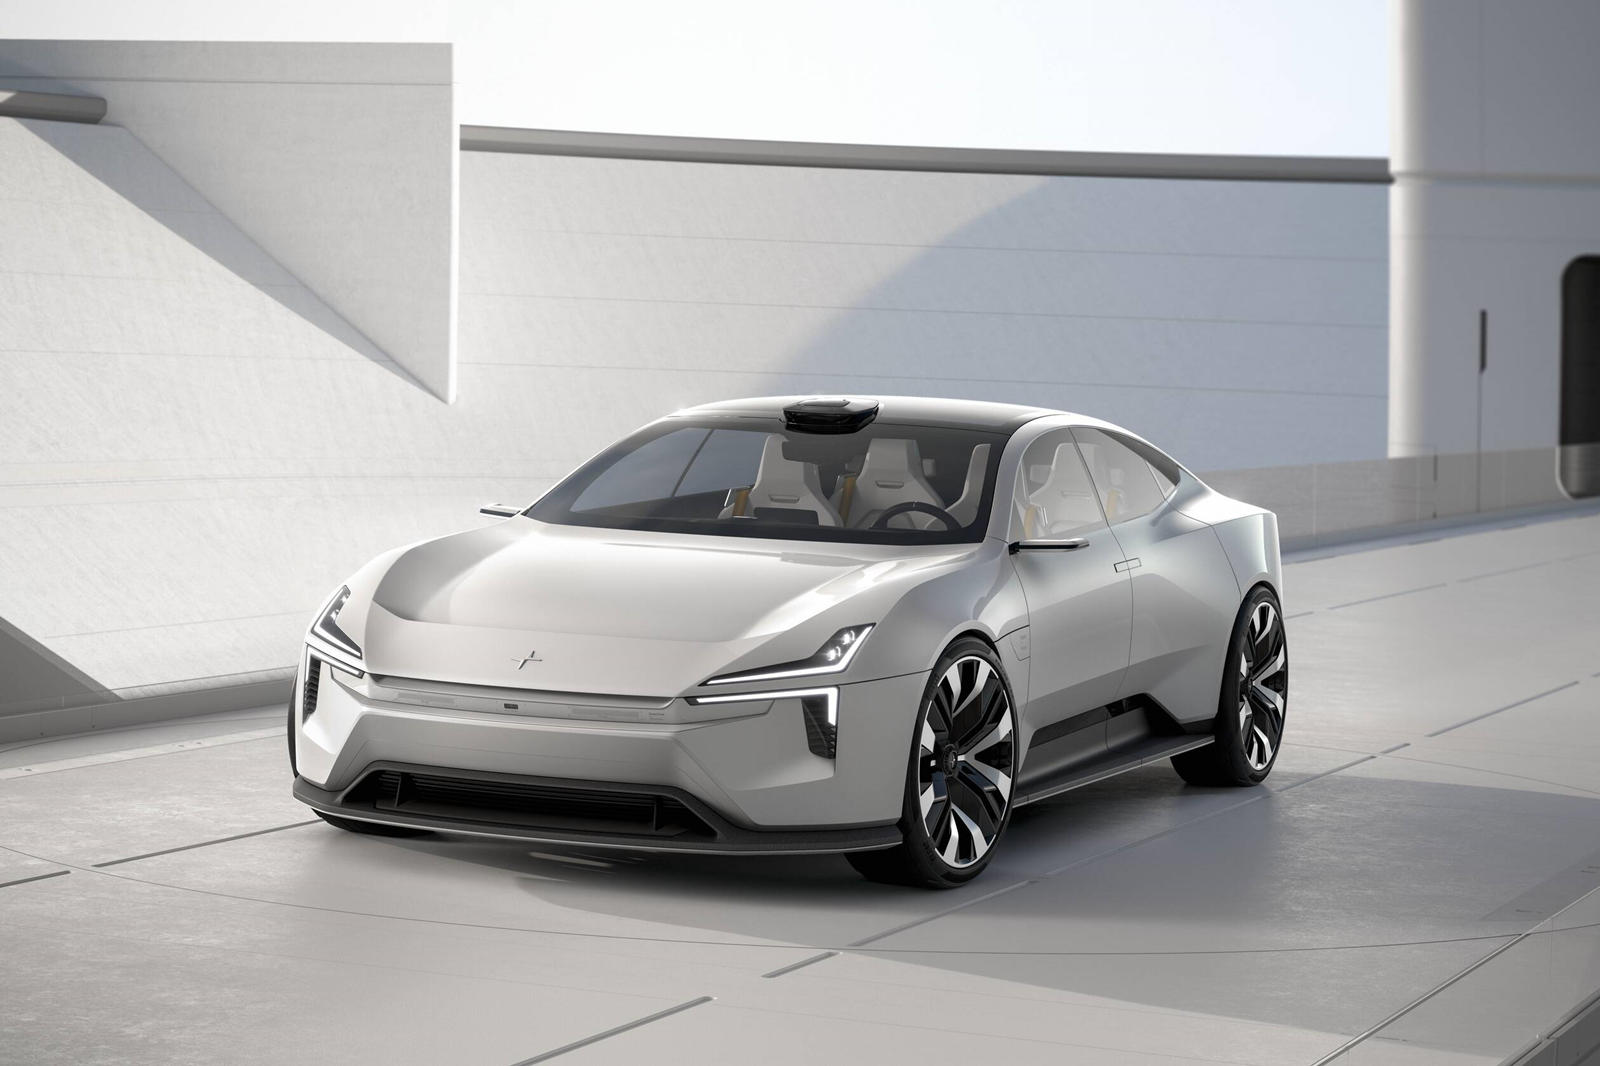 Luxury Electric Cars Coming in 2023 From Lexus, Polestar, Lucid